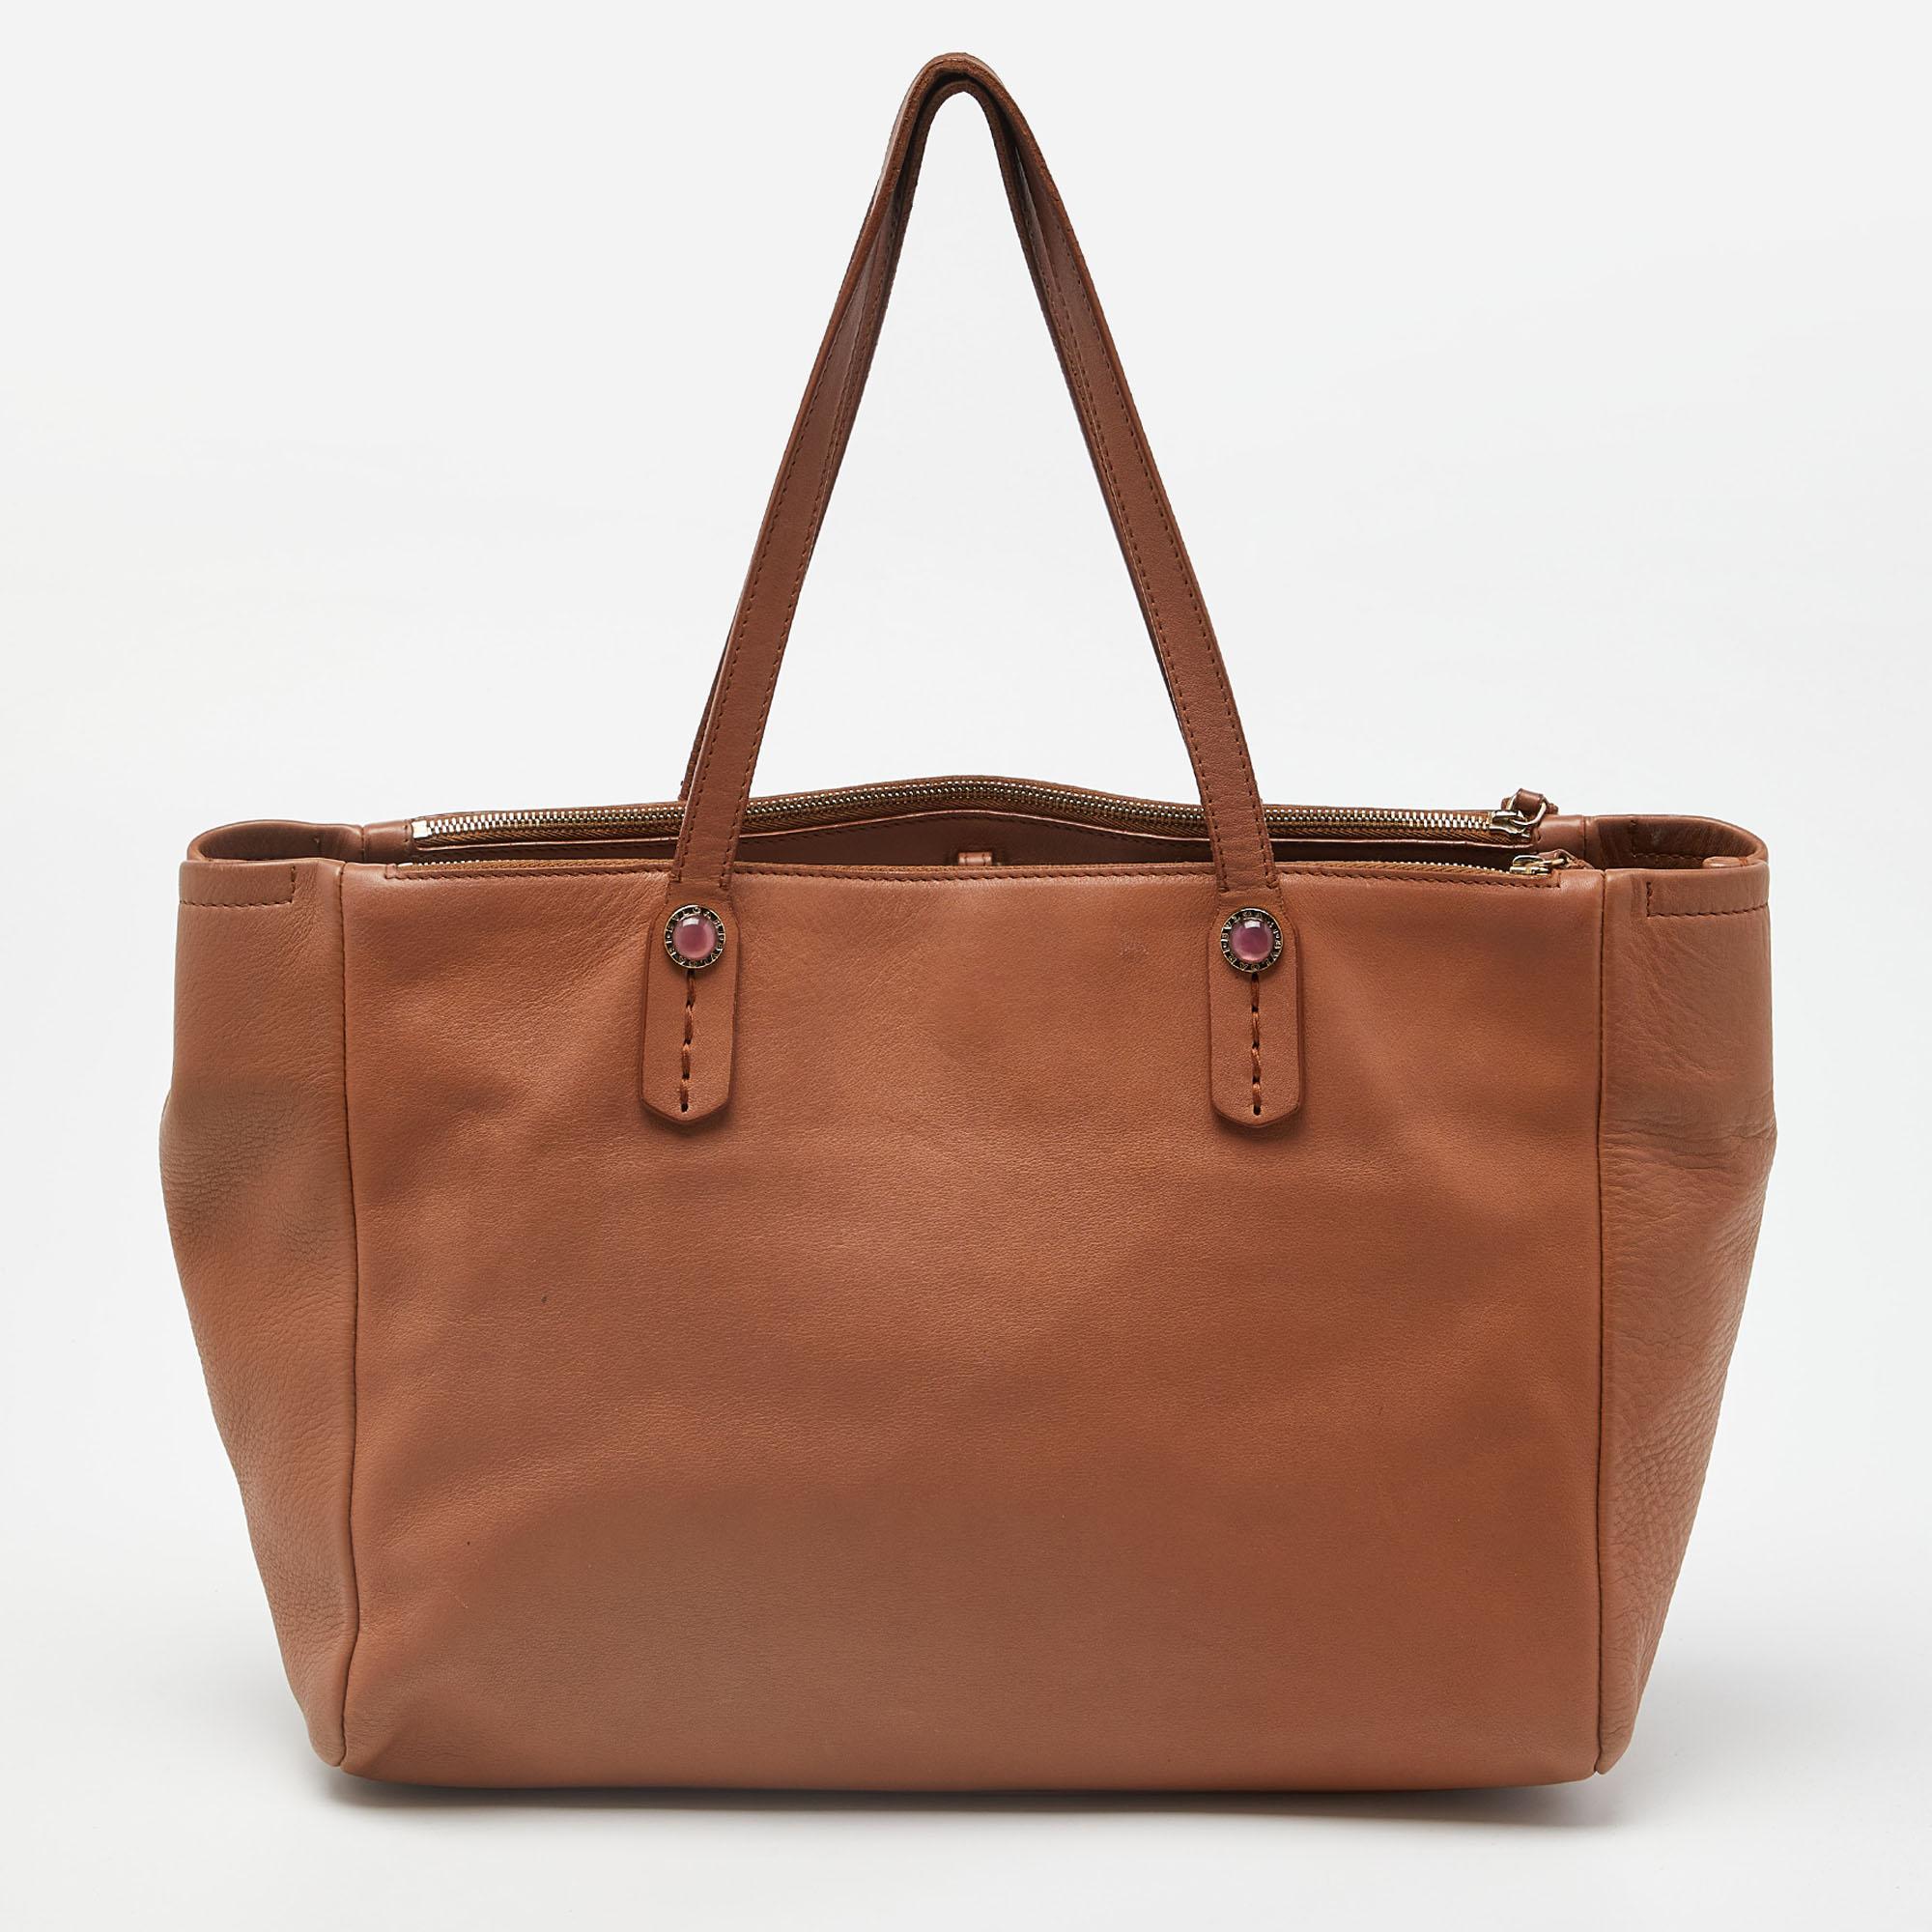 Bvlgari Brown Leather Double Zip Shopper Tote For Sale 1